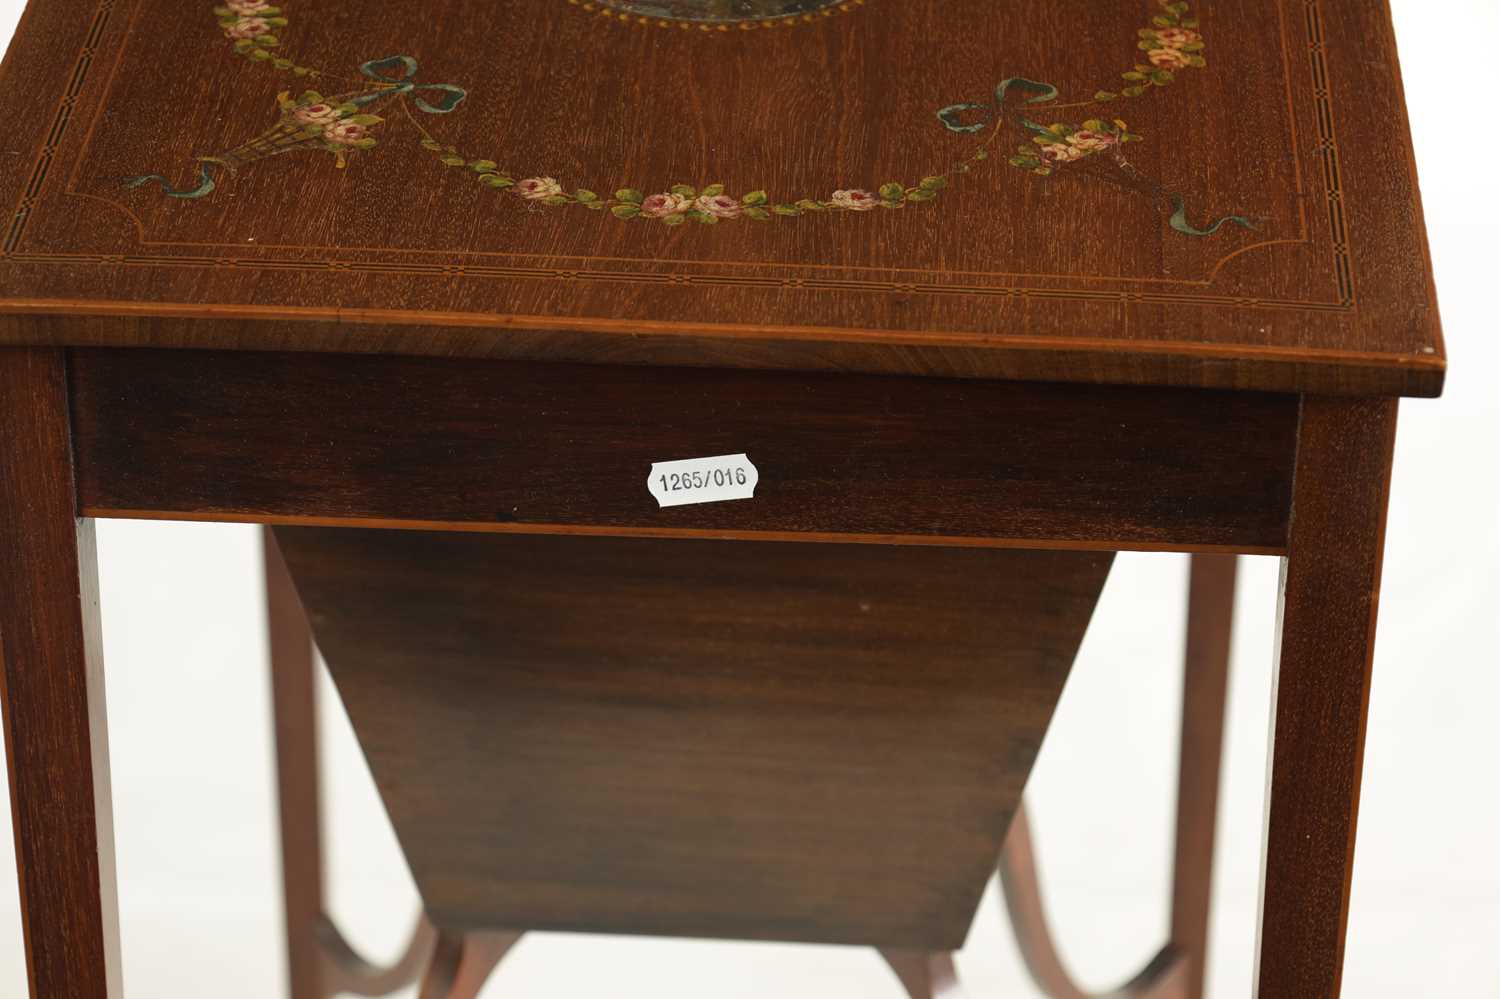 A 19TH CENTURY PAINTED MAHOGANY SHERATON STYLE WORK TABLE - Image 8 of 8